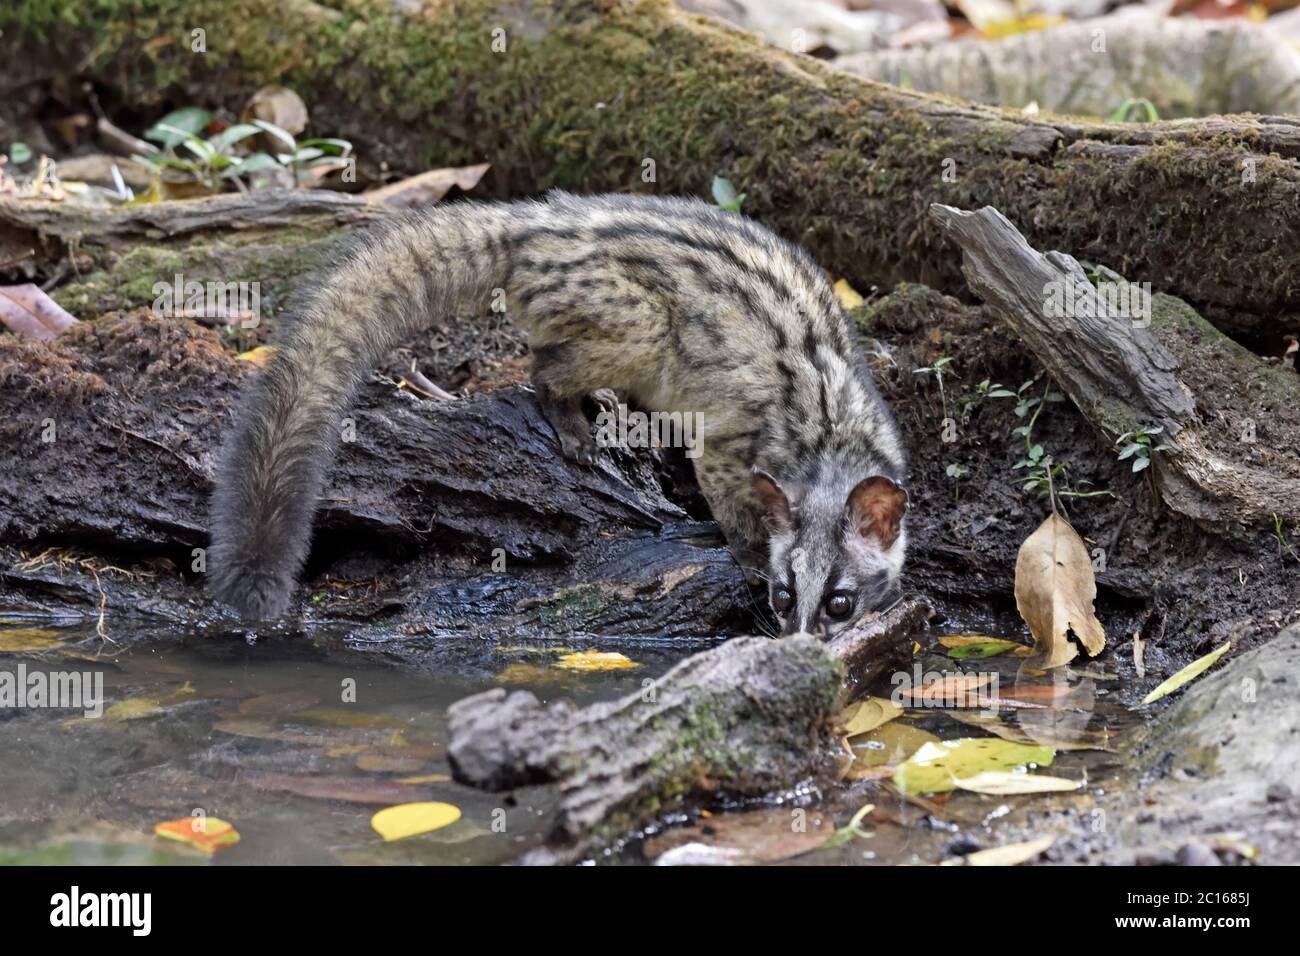 An Asian Palm Civet (Paradoxurus hermaphroditus) drinking from a pool in the forest in Thailand Stock Photo